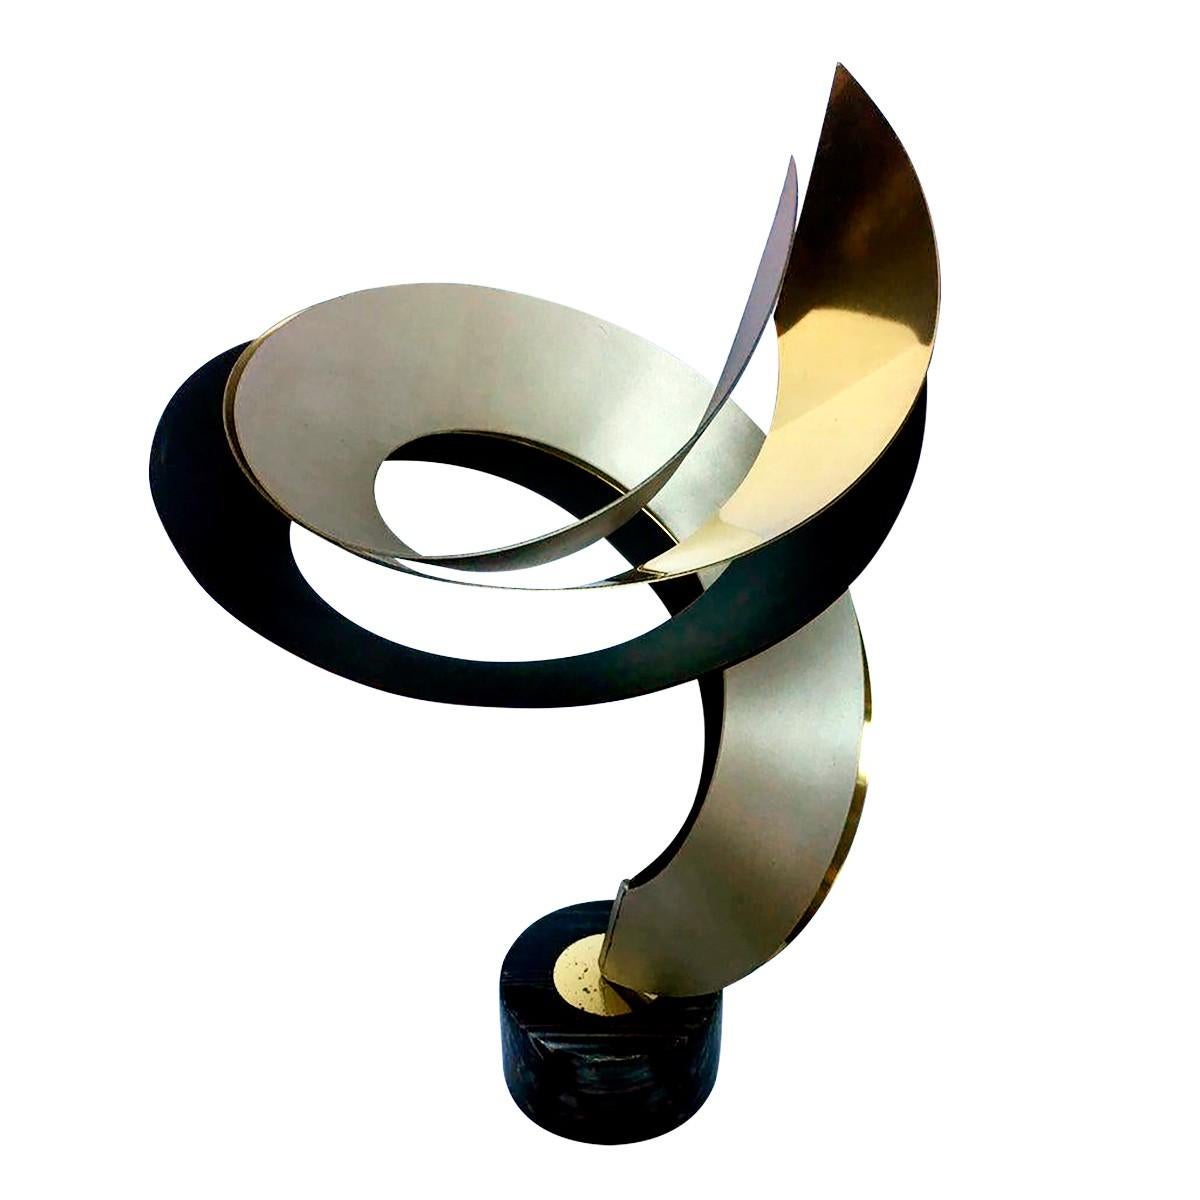 Mixed metal modern table sculpture by Curtis Jere featuring brass, black and matte silver. Polished six inch marble base. No signature.
     